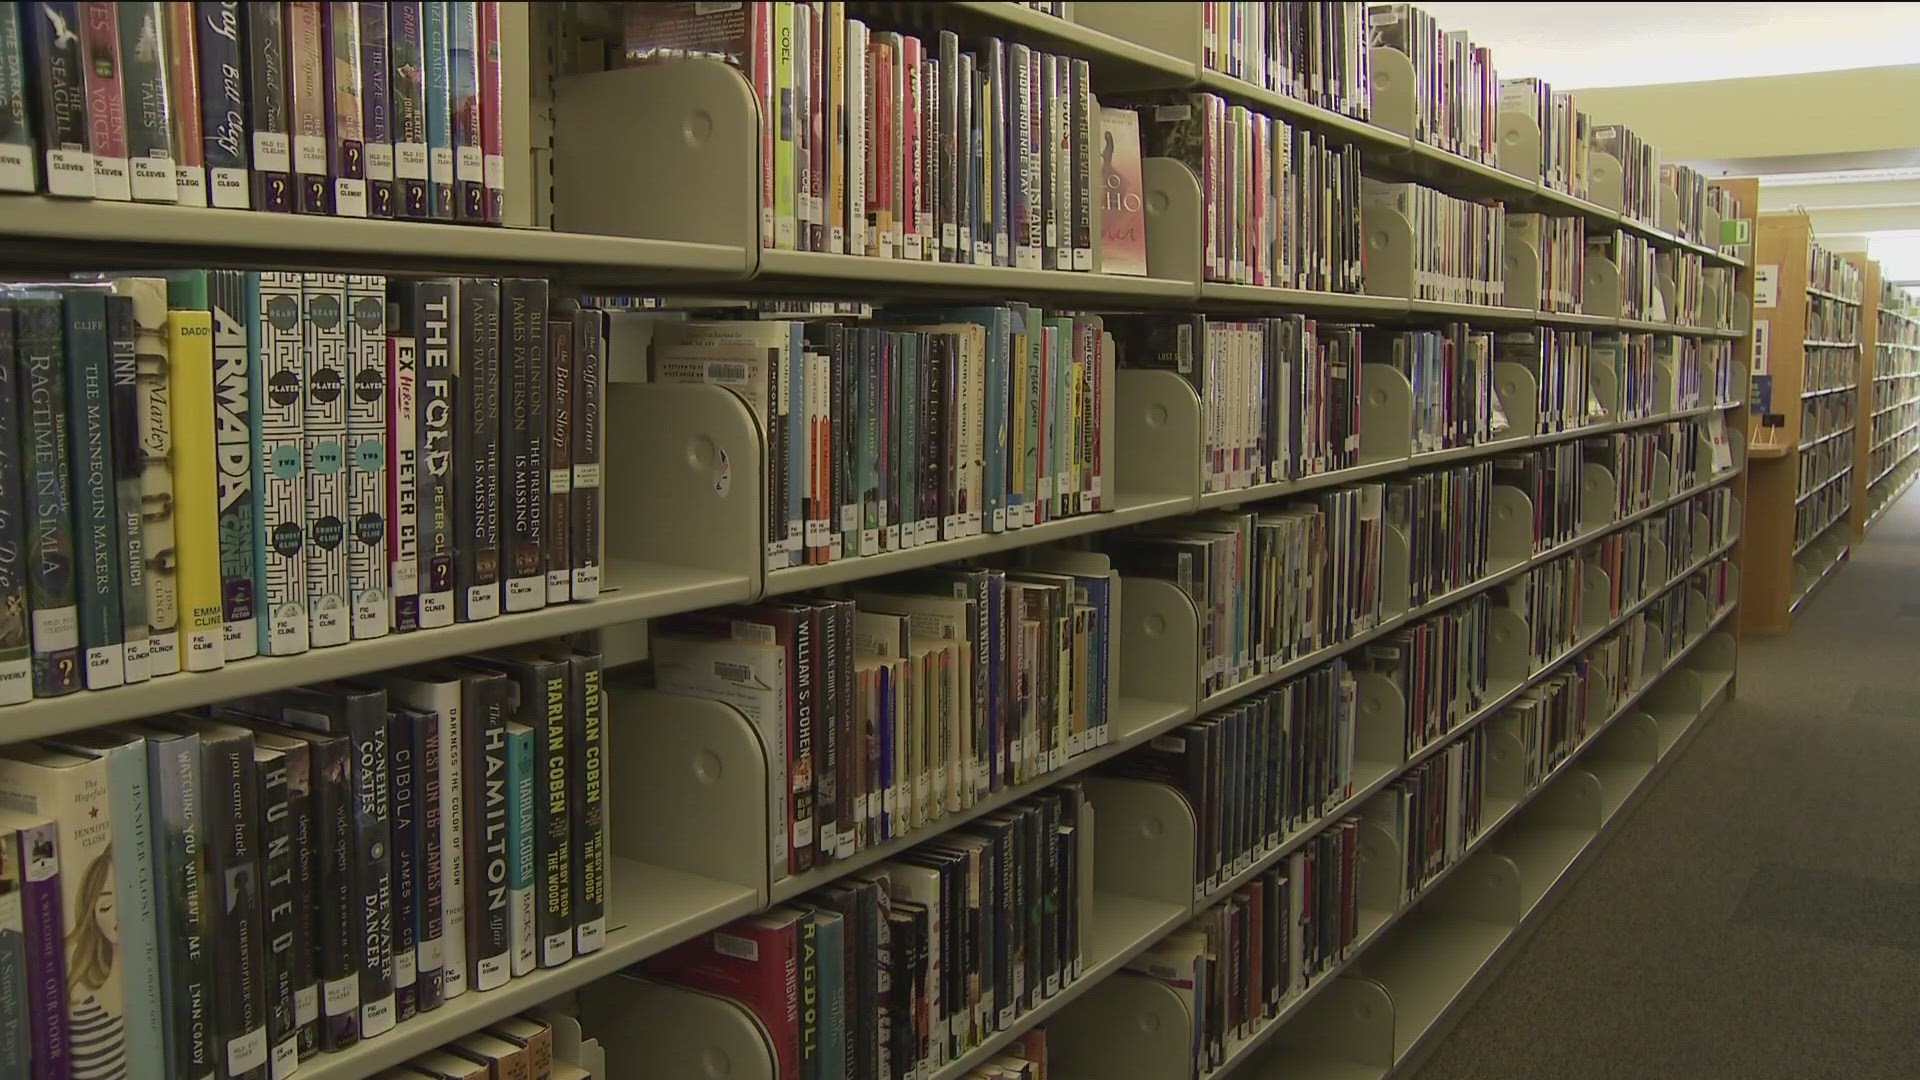 The Idaho Library Association testified in strong opposition to the bill in committee hearings.